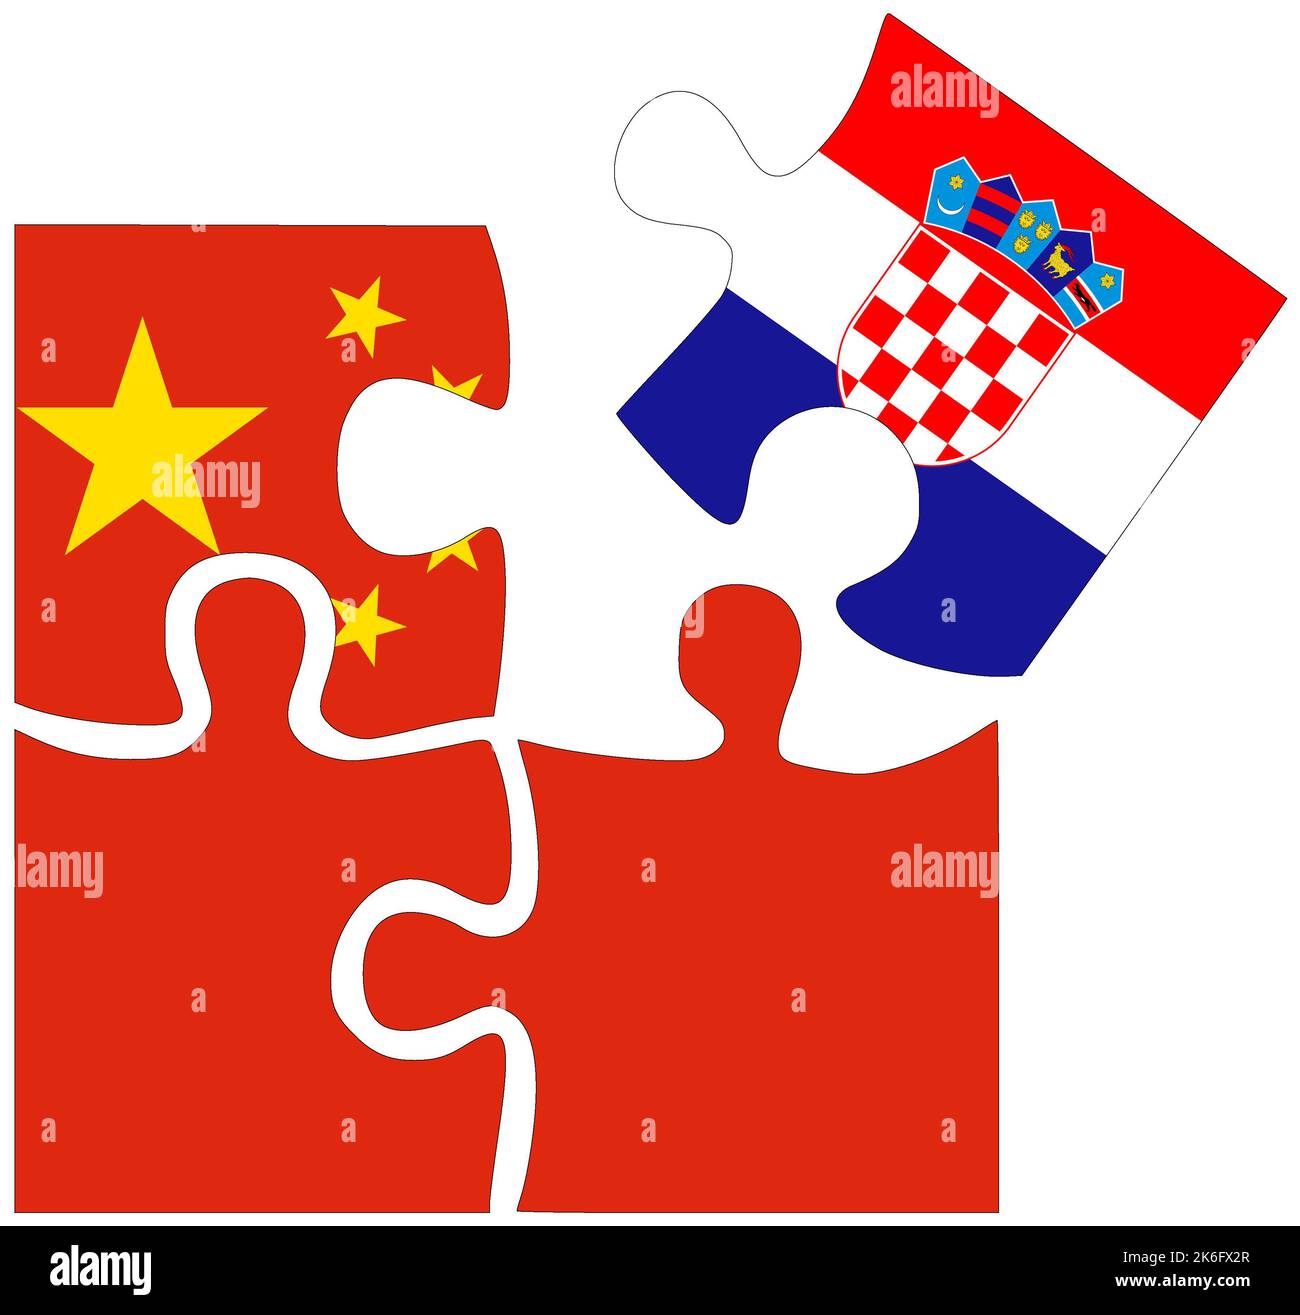 China - Croatia : puzzle shapes with flags, symbol of agreement or friendship Stock Photo